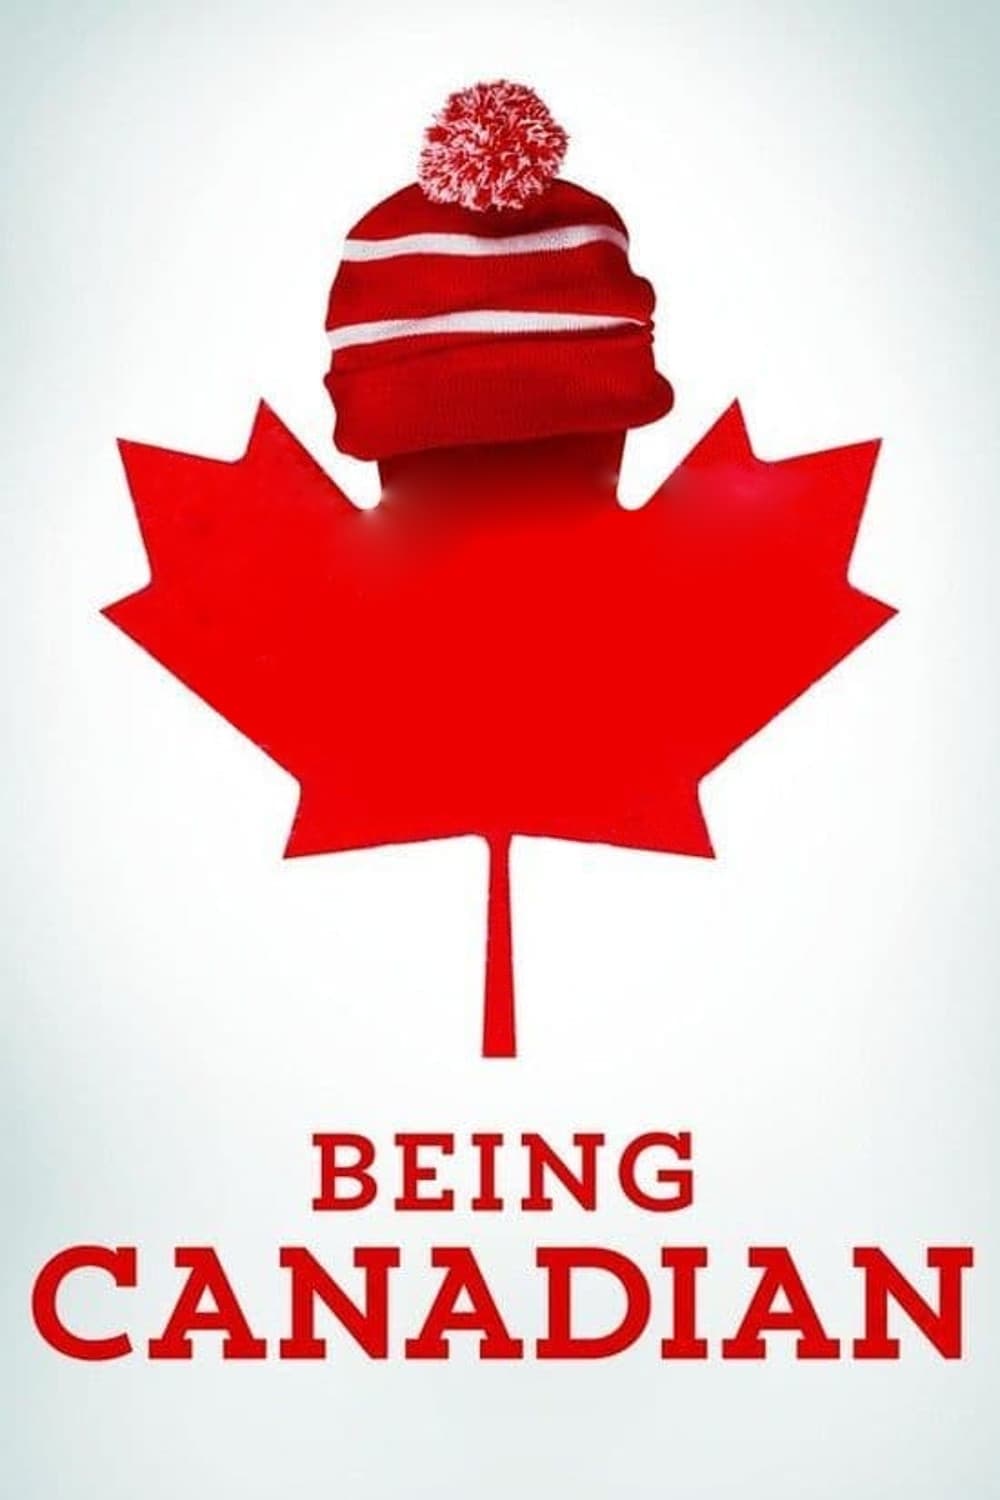 Being Canadian (2015)